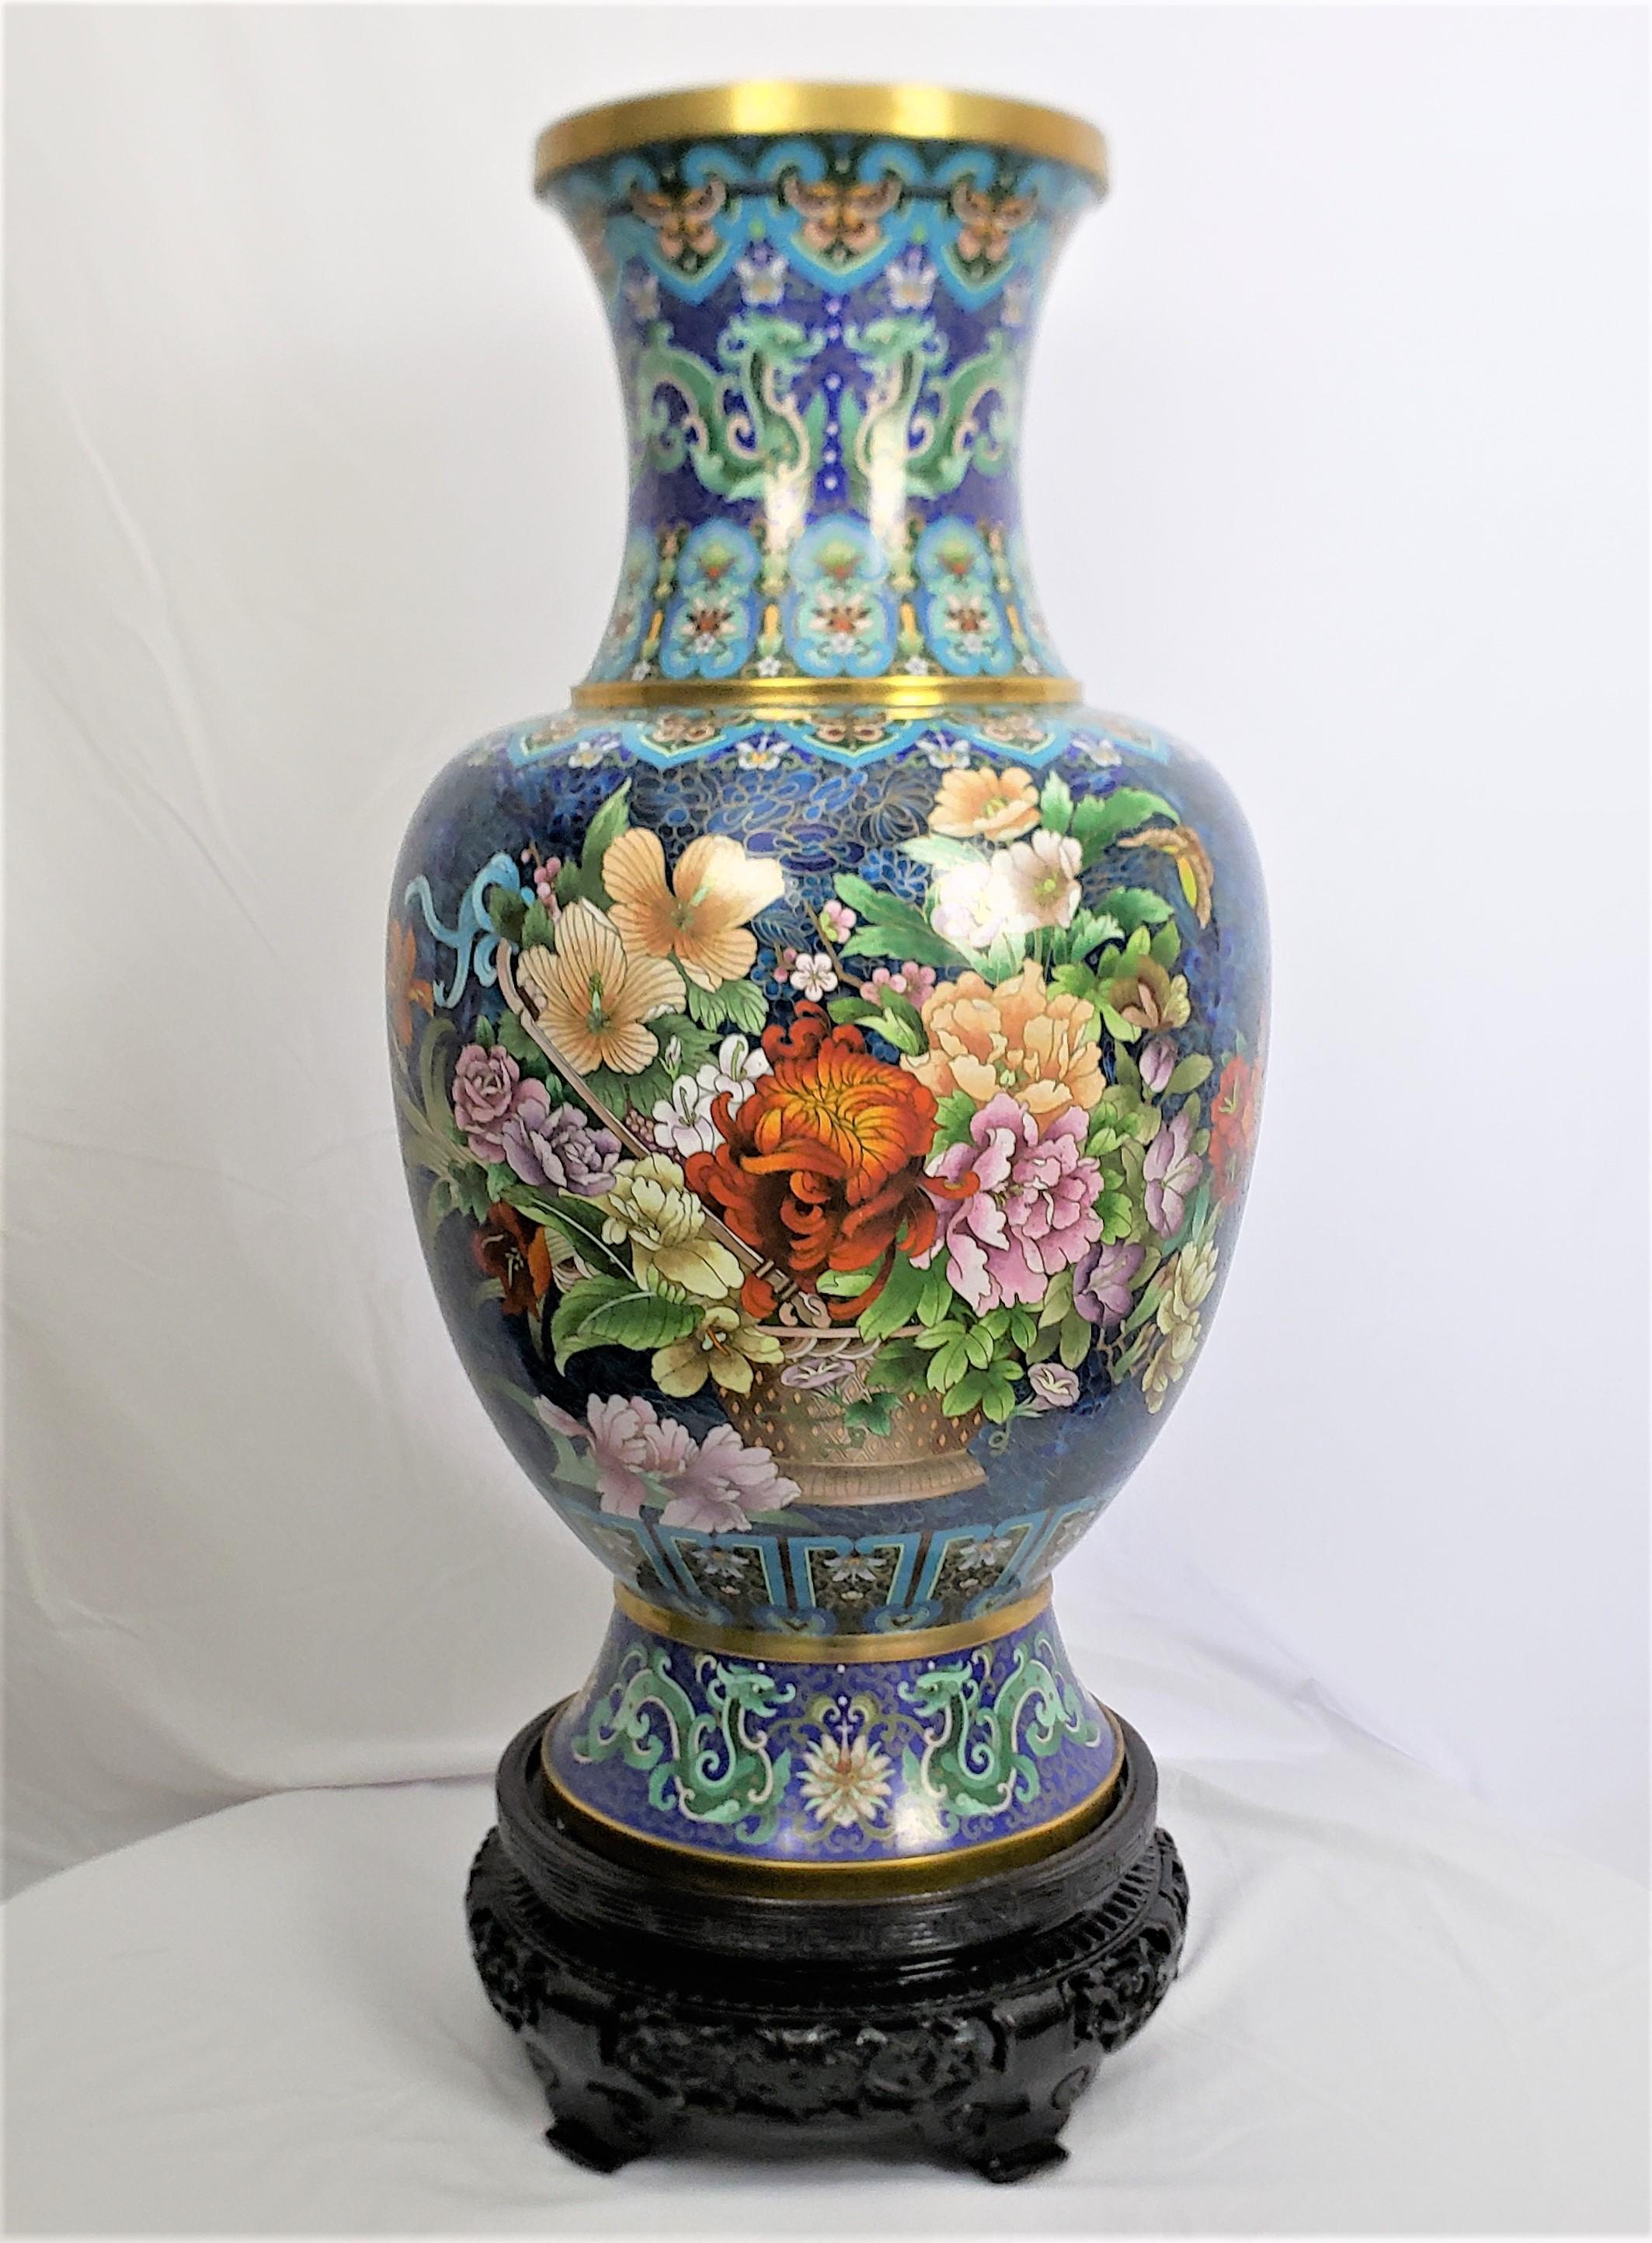 This extremely large and substantial cloisonne vase is unsigned, but presumed to have originated from China, and date to approximately 1970 and done in the period Chinese Export style. The vase is done with a cobalt blue ground with two very